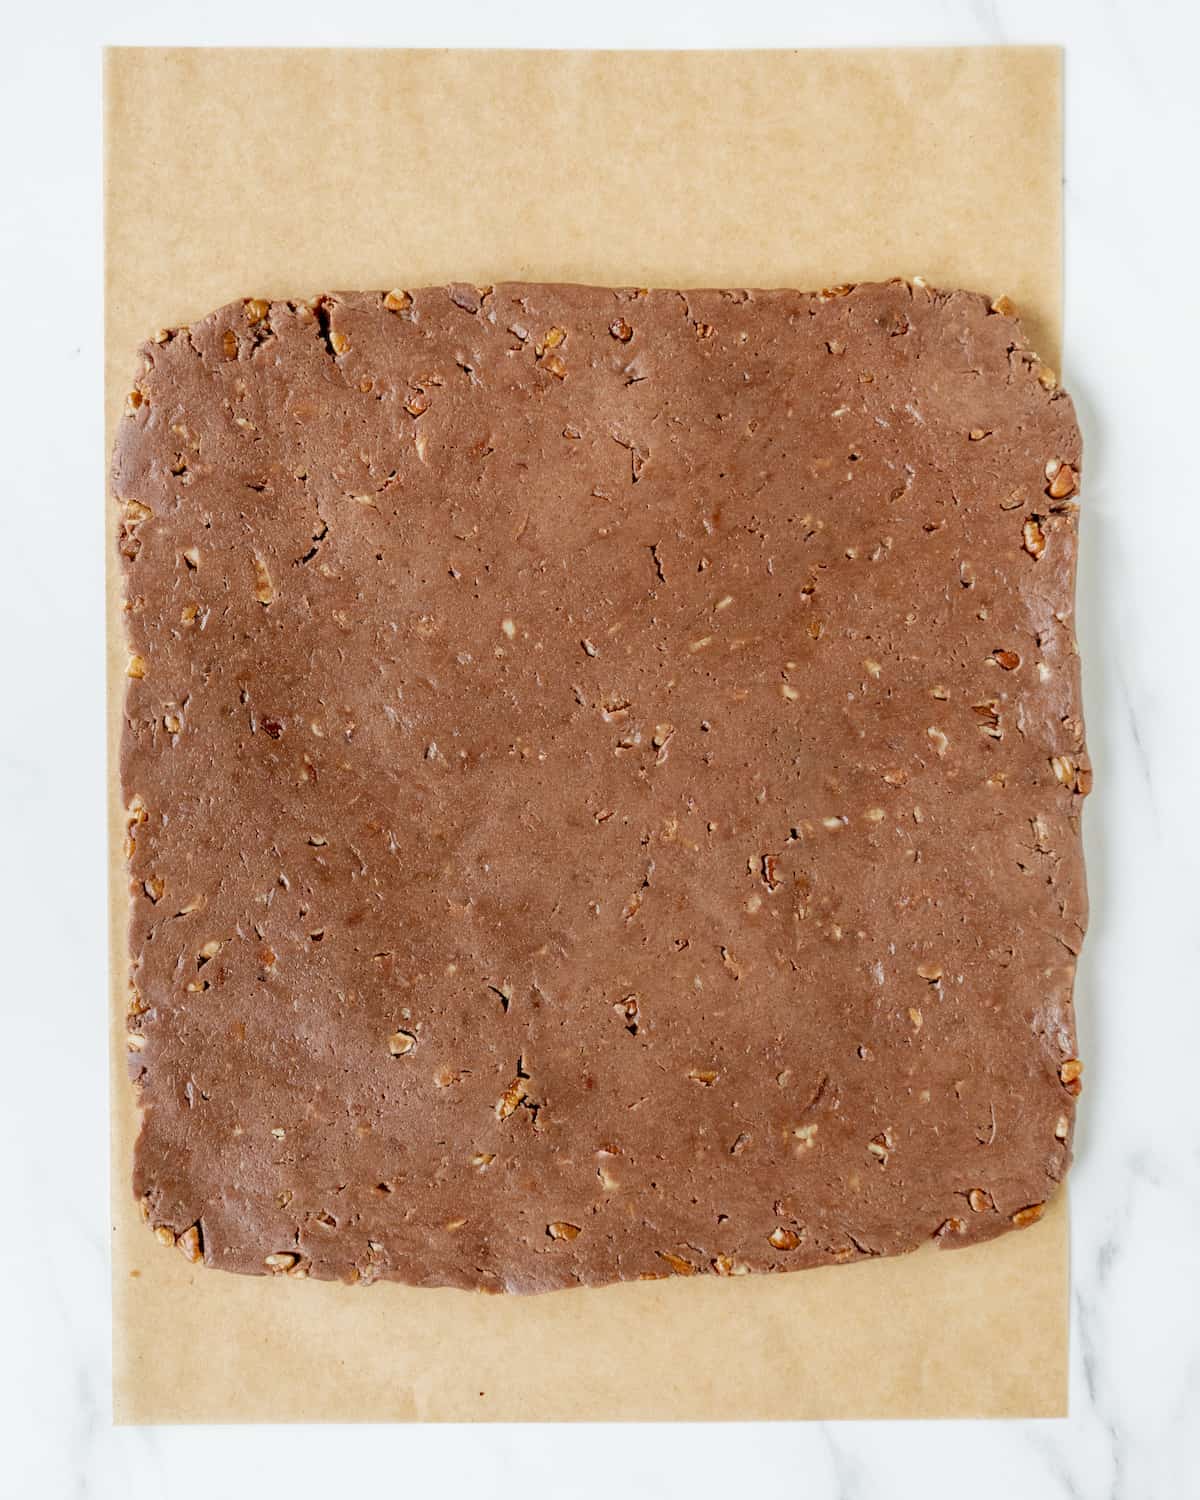 The unused brownie dough has been hand pressed into a large square on a piece of parchment paper.  